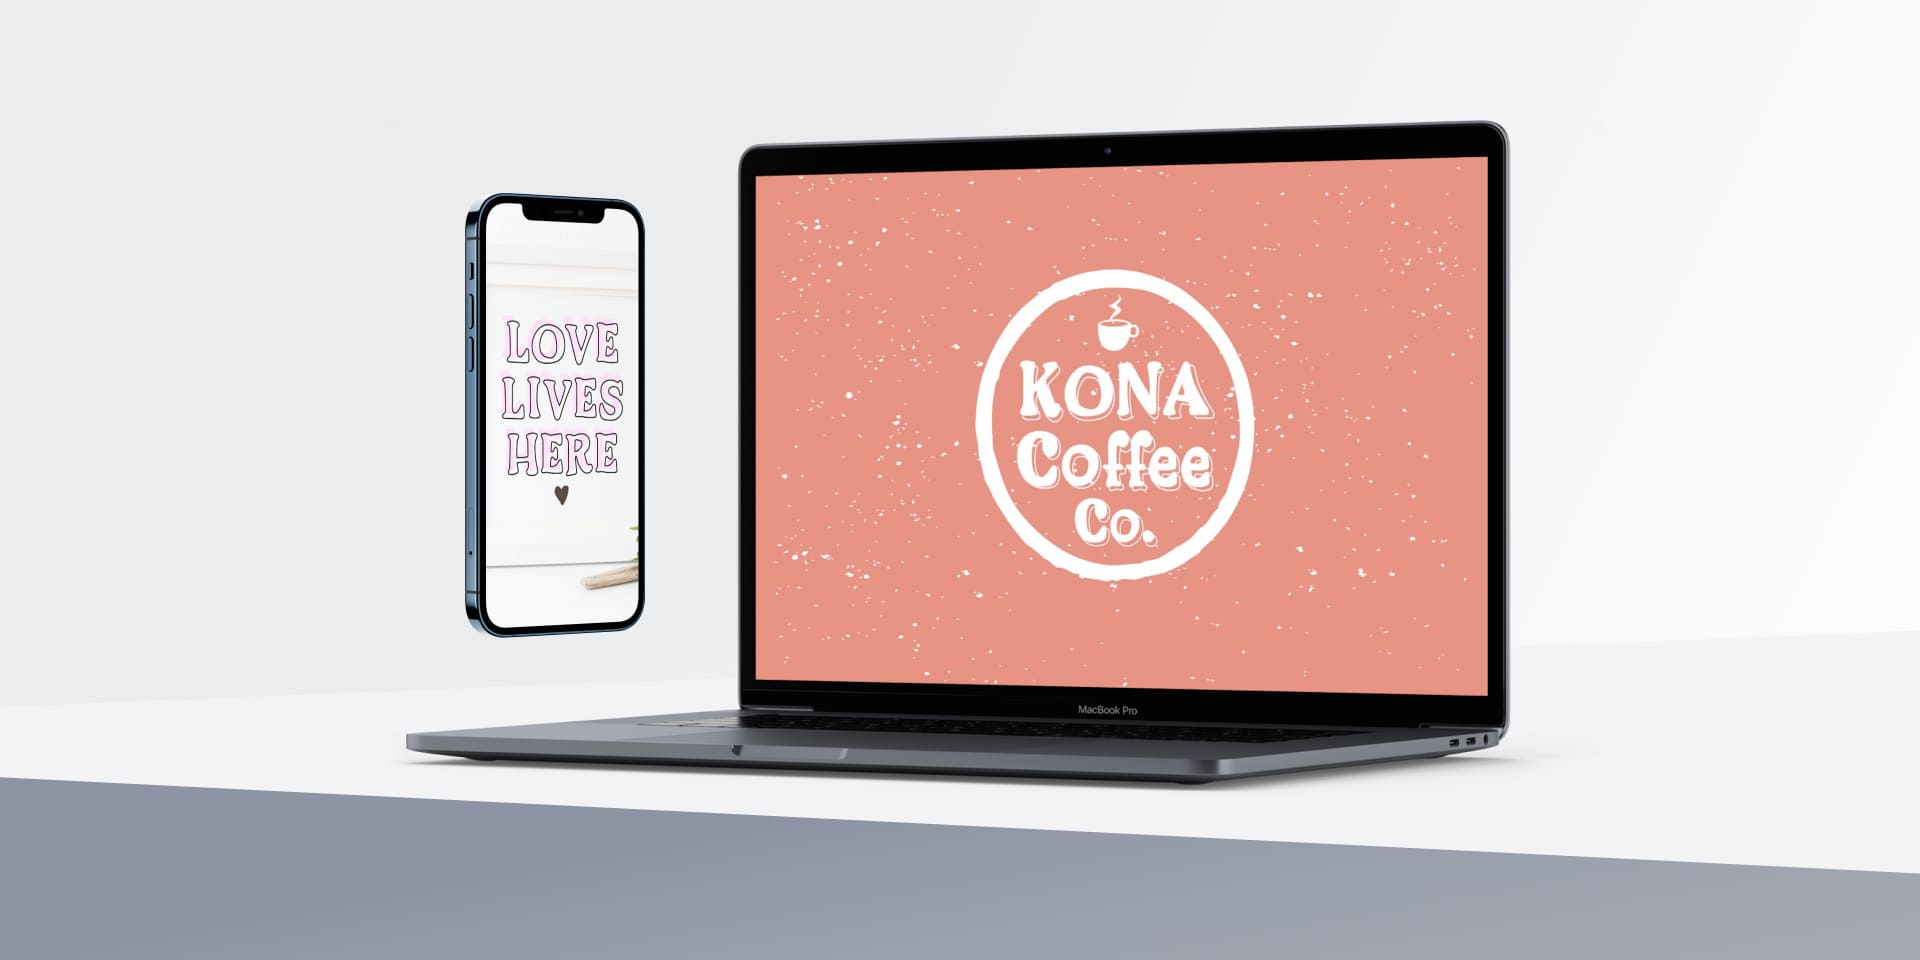 Cozy Outline - "Love Lives Here", "Kona Coffee Co." On The Phone And Laptop.